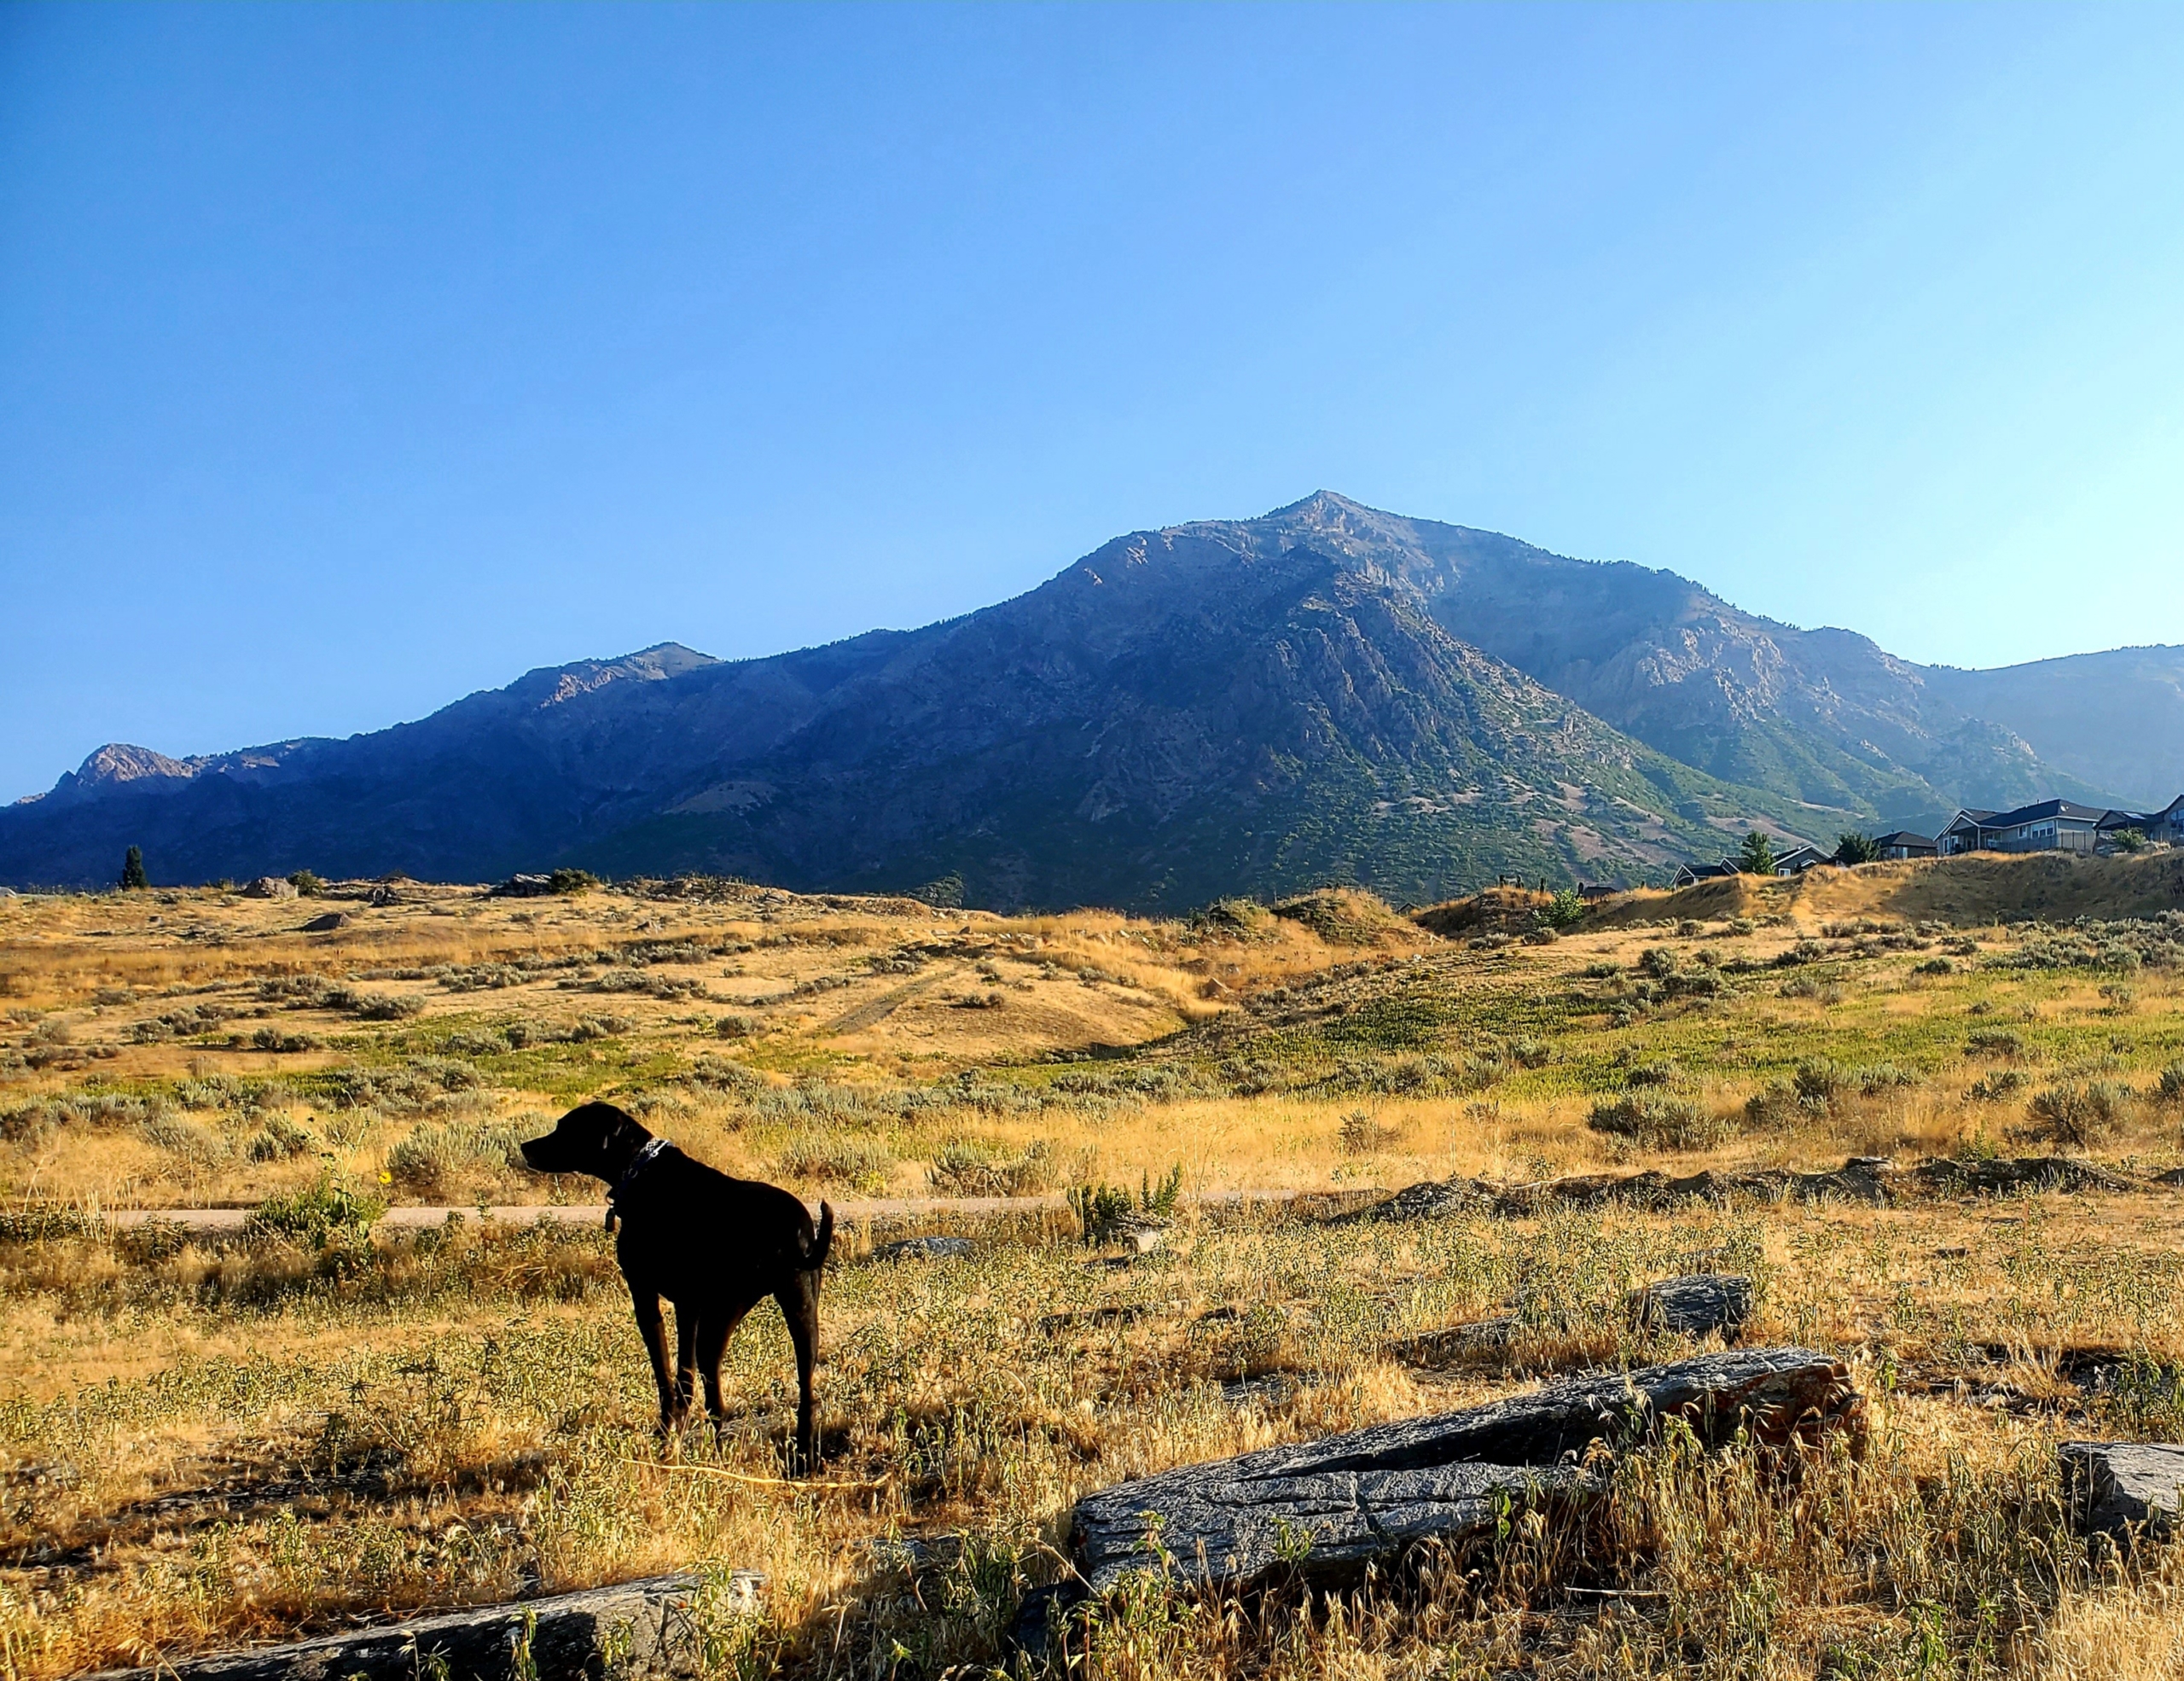 Famous Shamus, a black mutt, stands in a golden field in front of a mountain, with a blue sky above